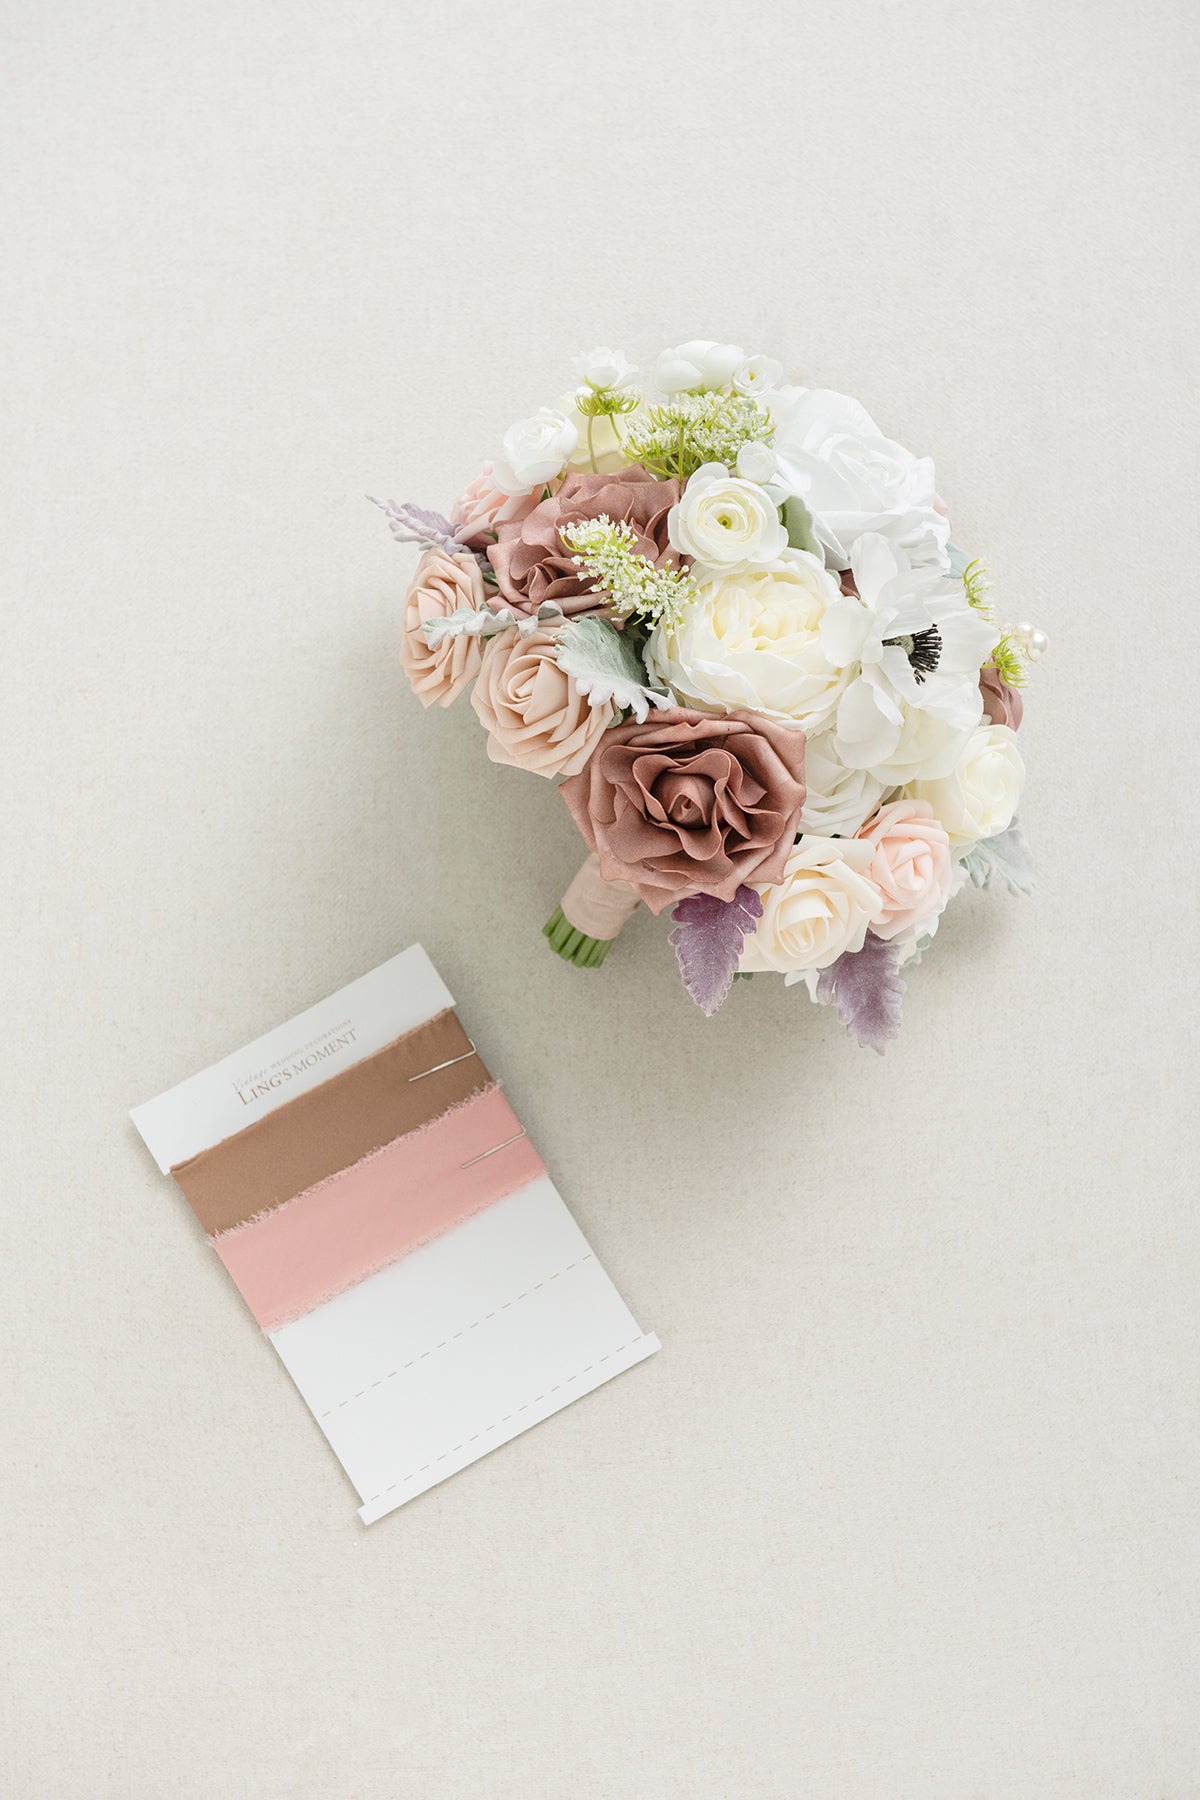 Small Round Bridal Bouquets in Dusty Rose & Cream